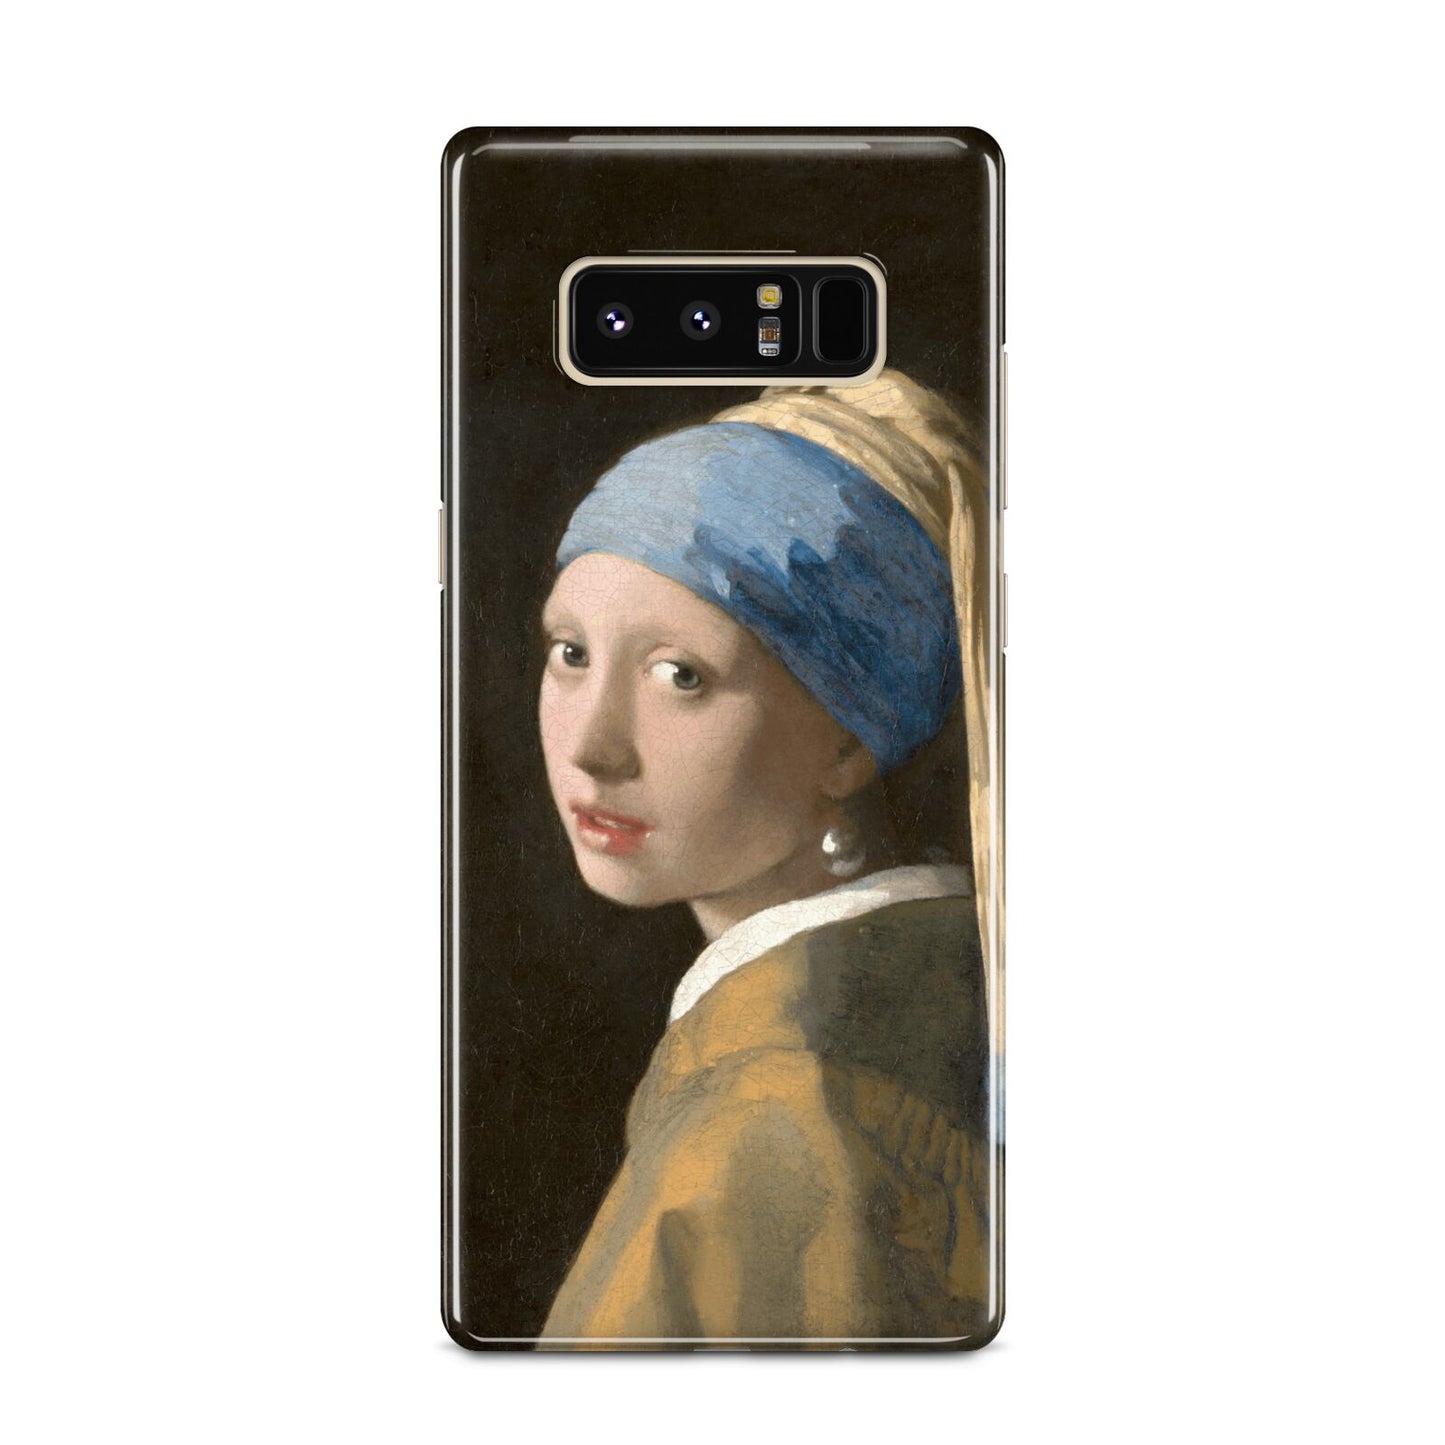 Girl With A Pearl Earring By Johannes Vermeer Samsung Galaxy Note 8 Case